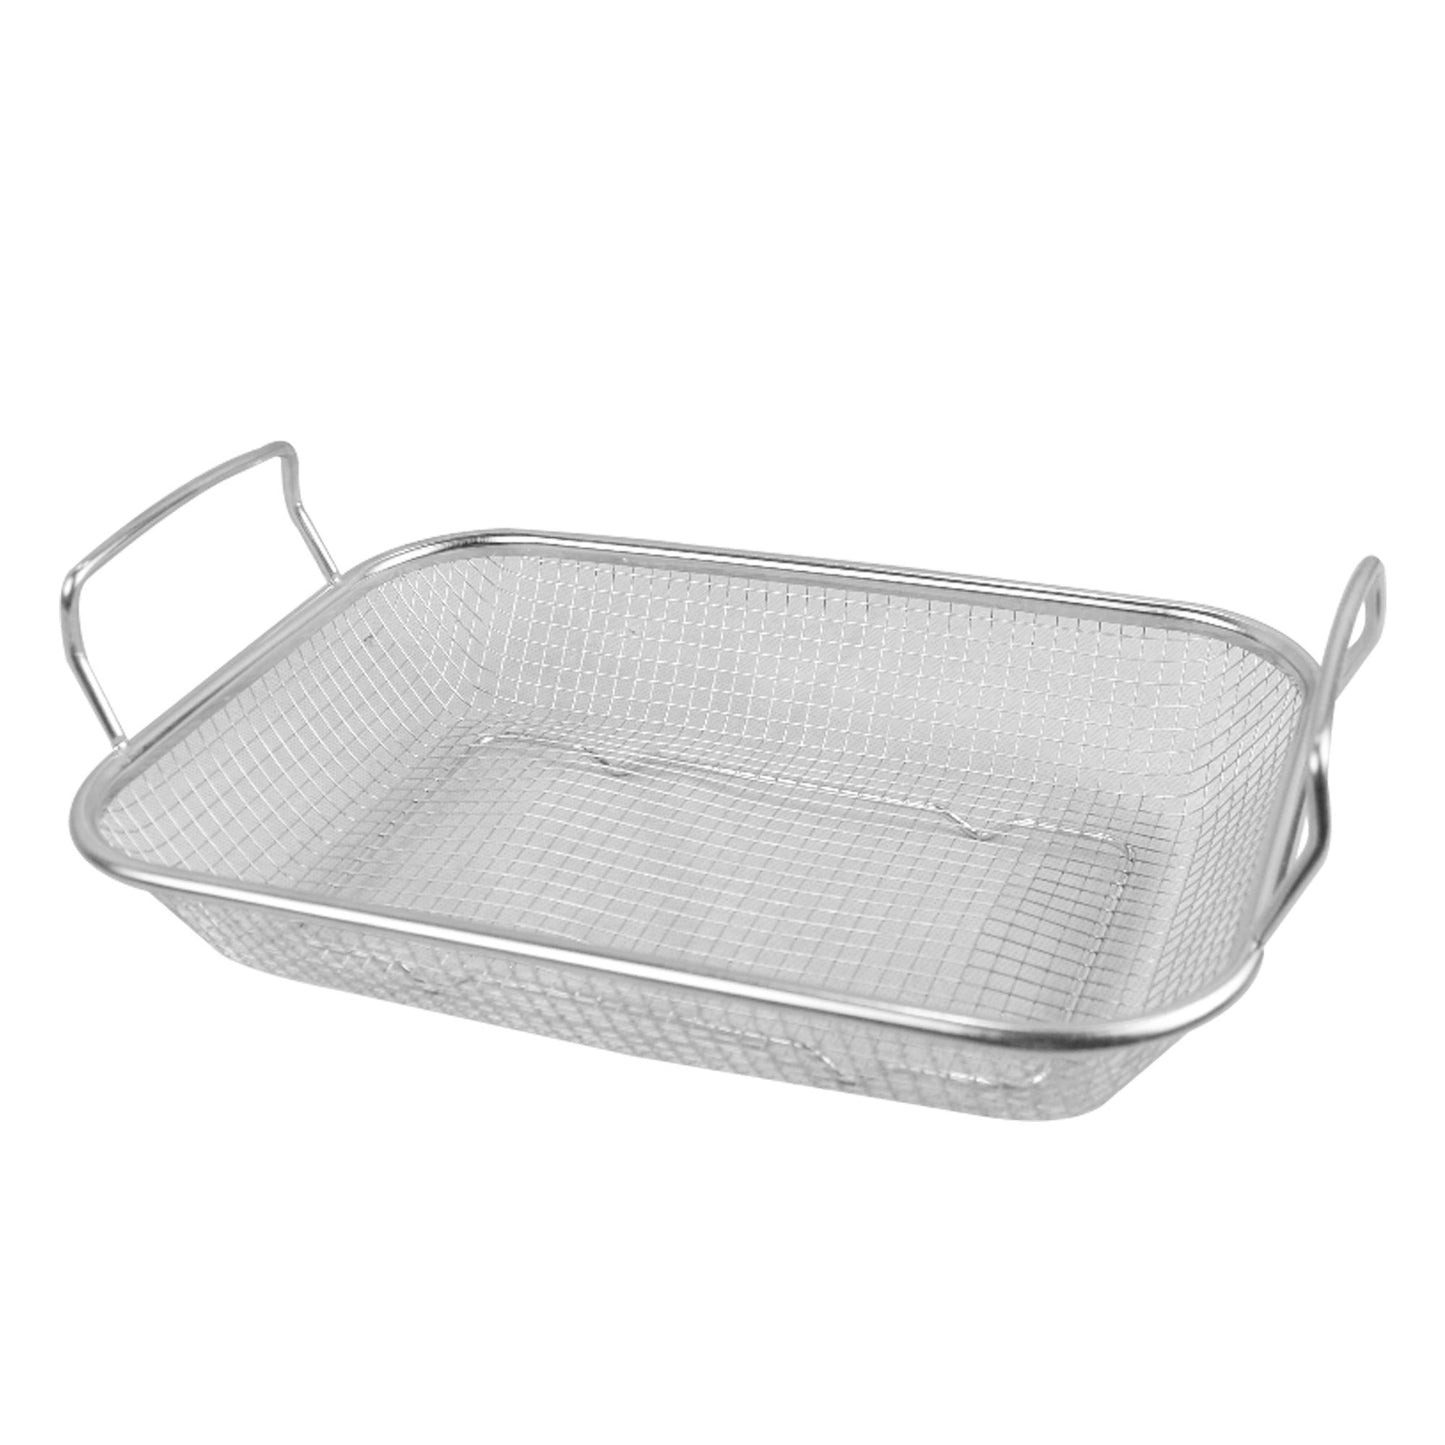 Rectangle Strainer Stainless Steel Fruit & Vegetable Basket 37x27x7.5 cm With Handles